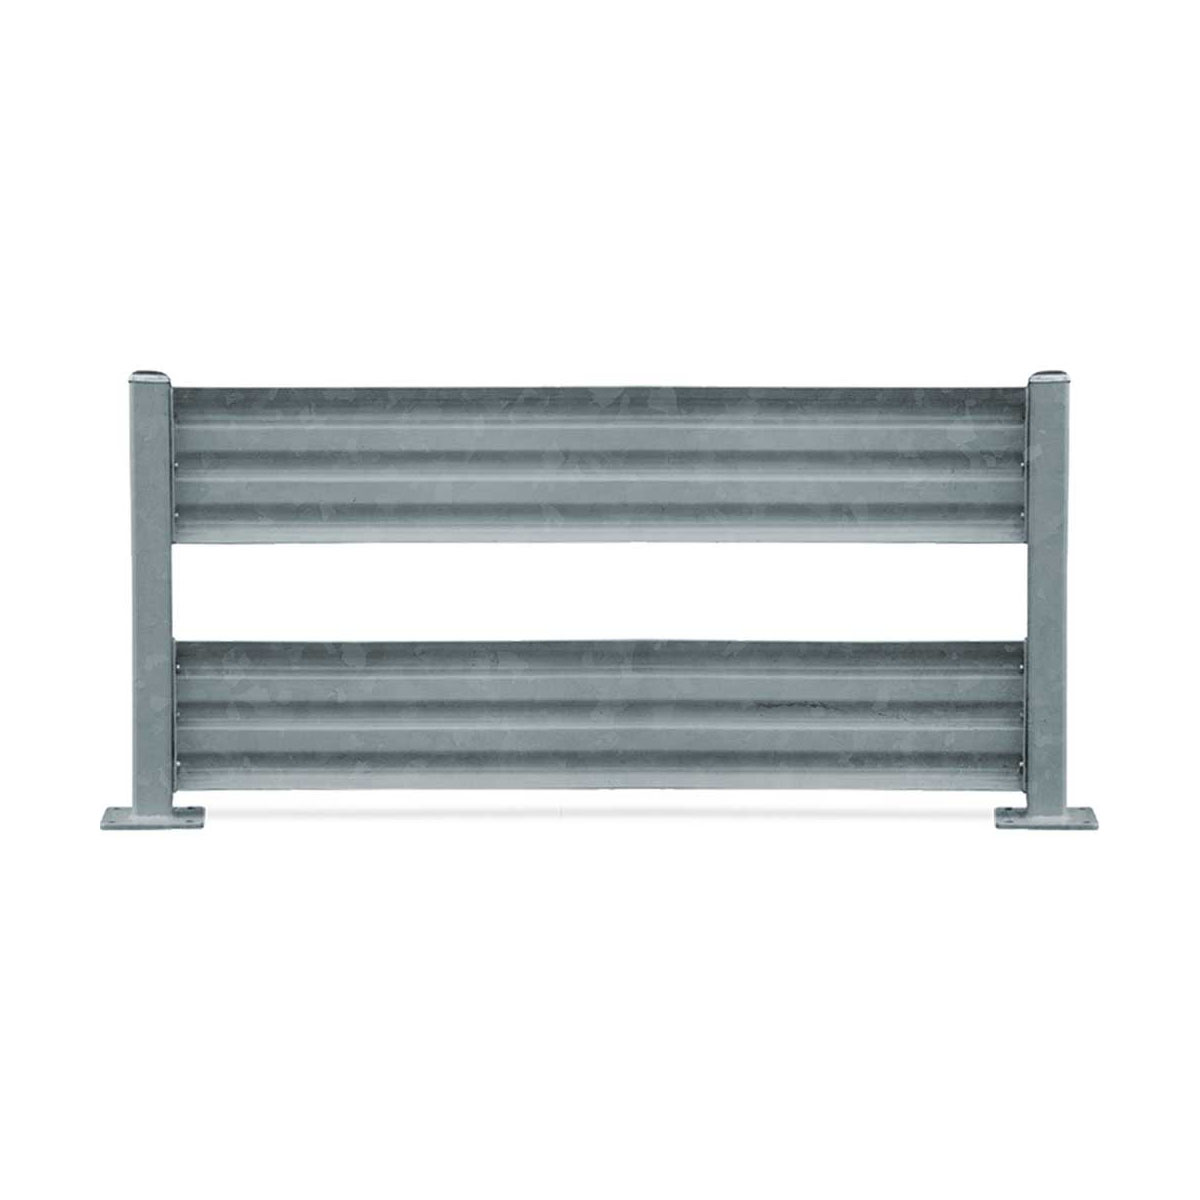 Traffic Barrier Double - GuardX (Galvanised)